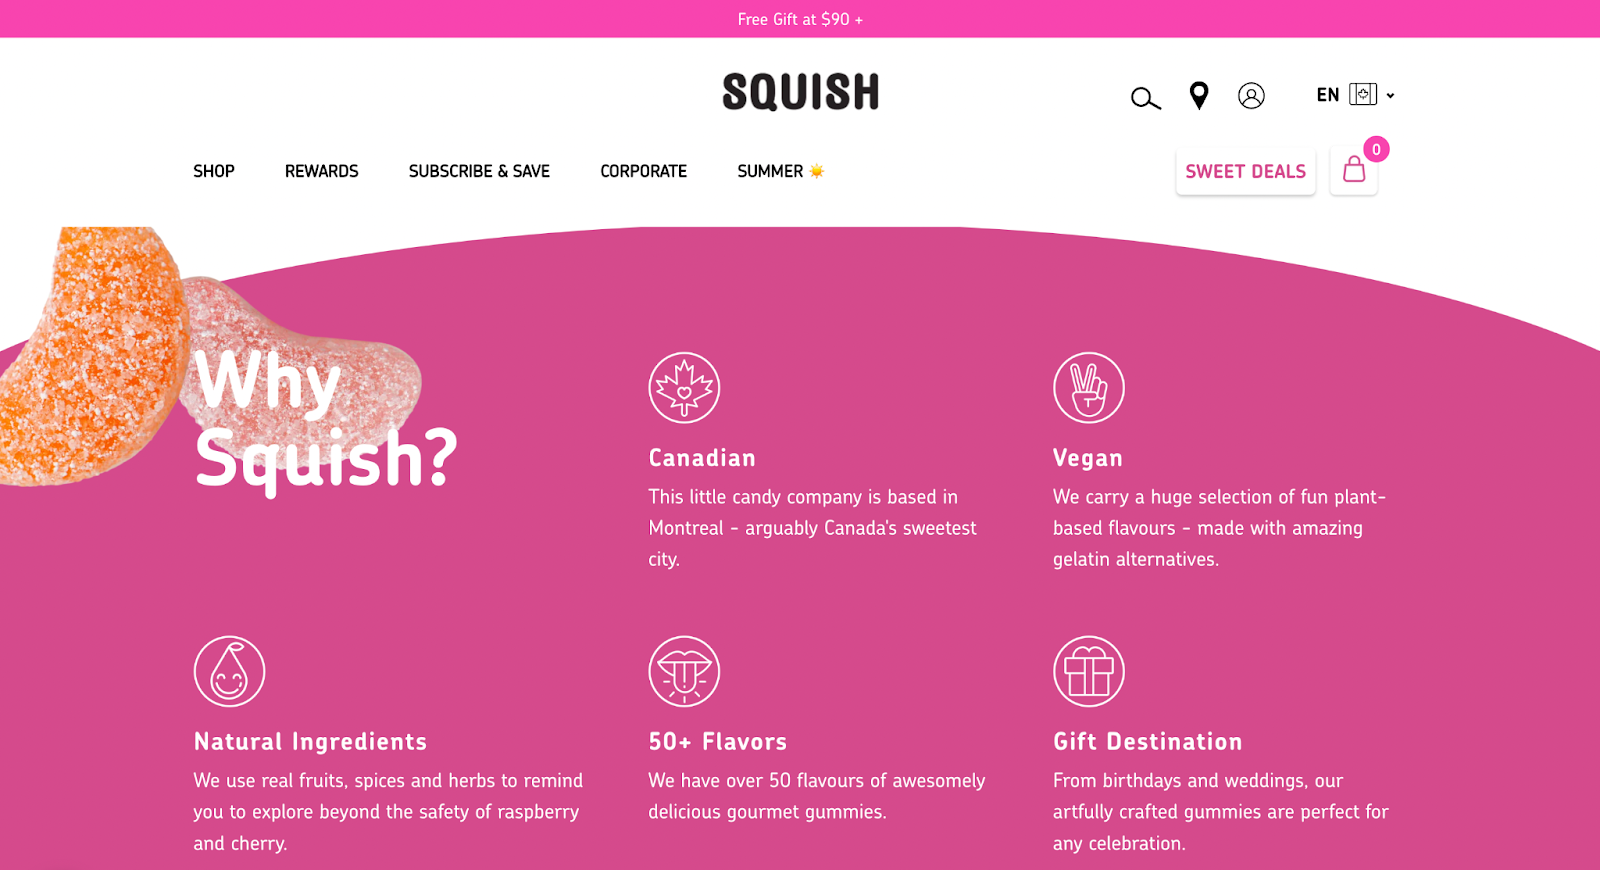 5 best referral program examples–A screenshot of Squish’s homepage that says “Why Squish?”. It lists 5 benefits including Canadian, vegan, natural ingredients, 50+ flavors, and gift destination.